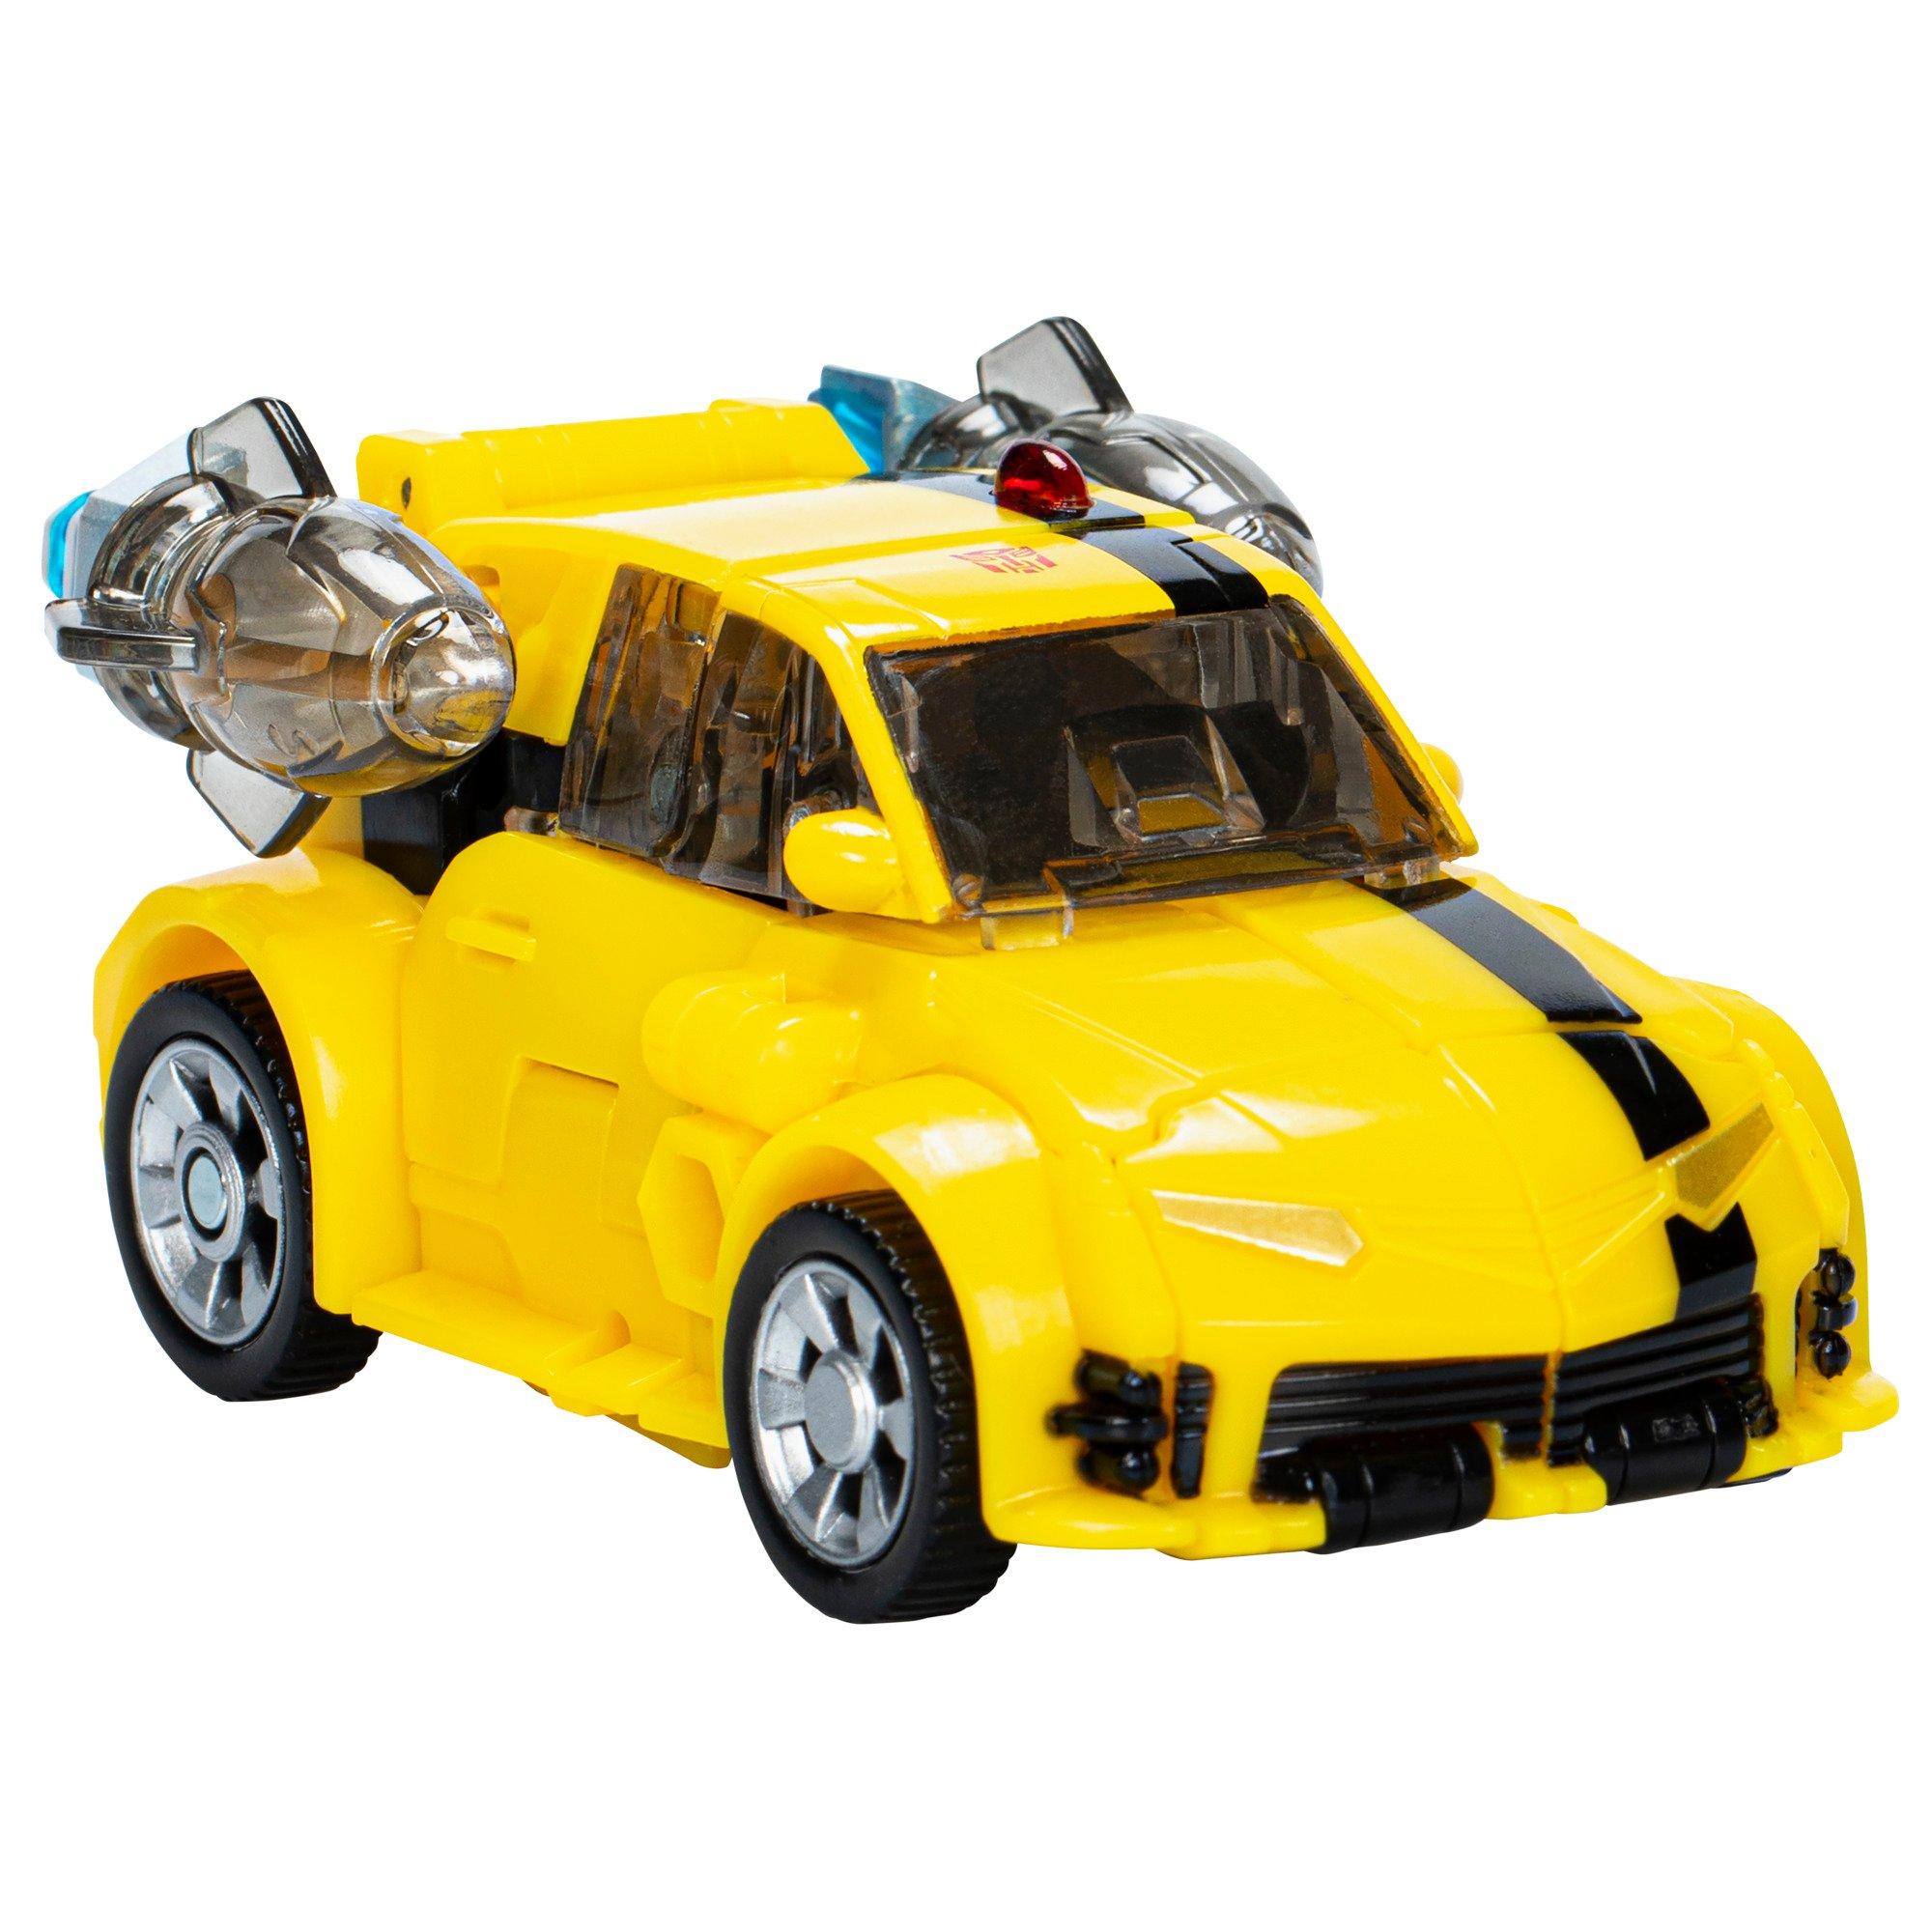 Hasbro Transformers Legacy United Deluxe Class Animated Universe Bumblebee  5.5-in Action Figure